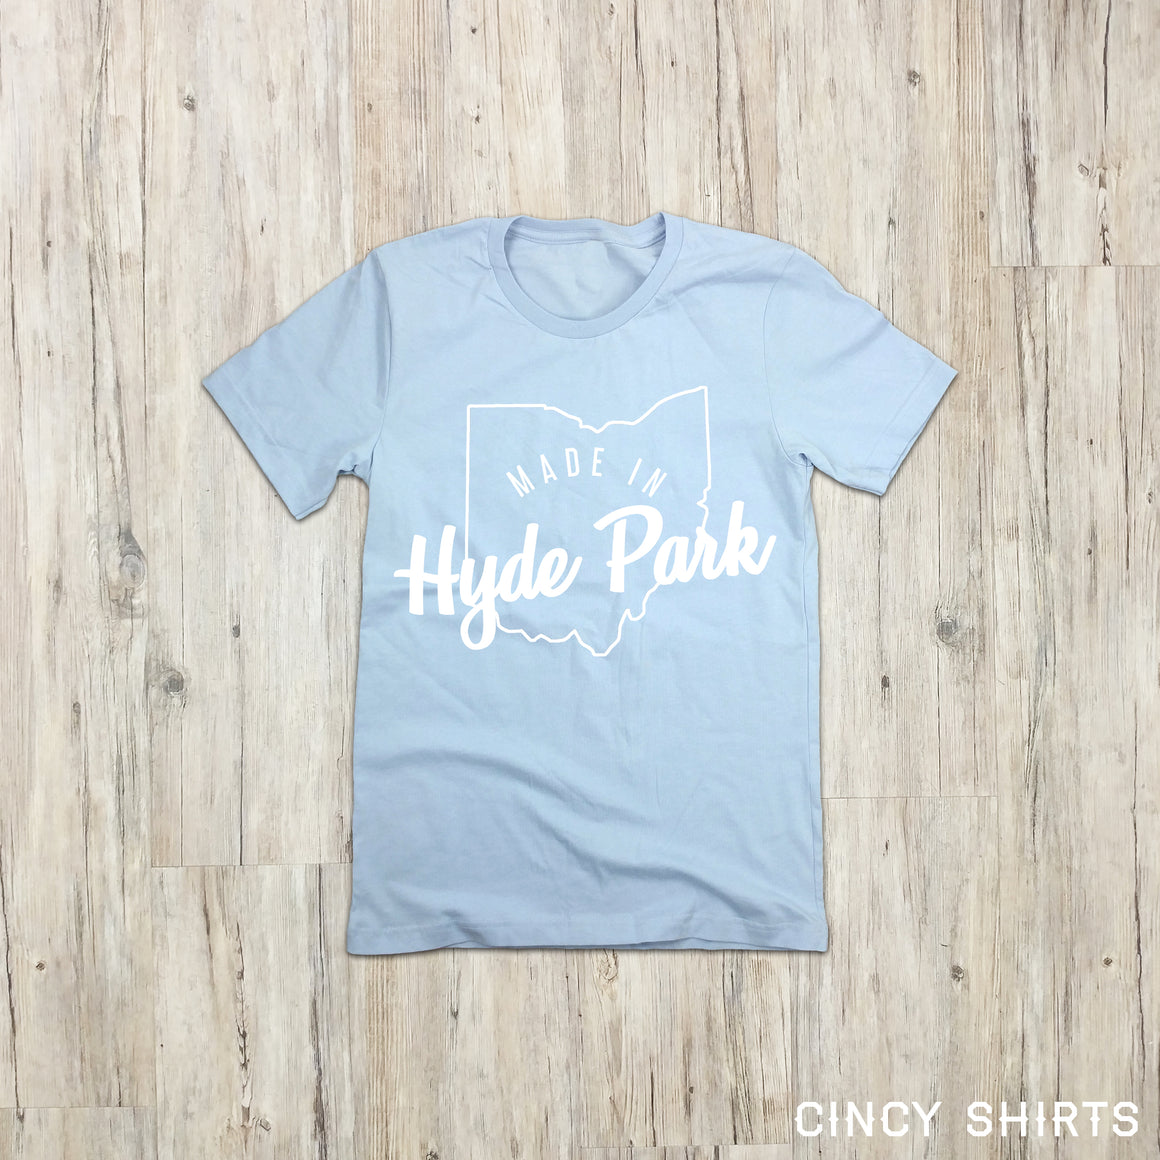 Made In Hyde Park - Cincy Shirts